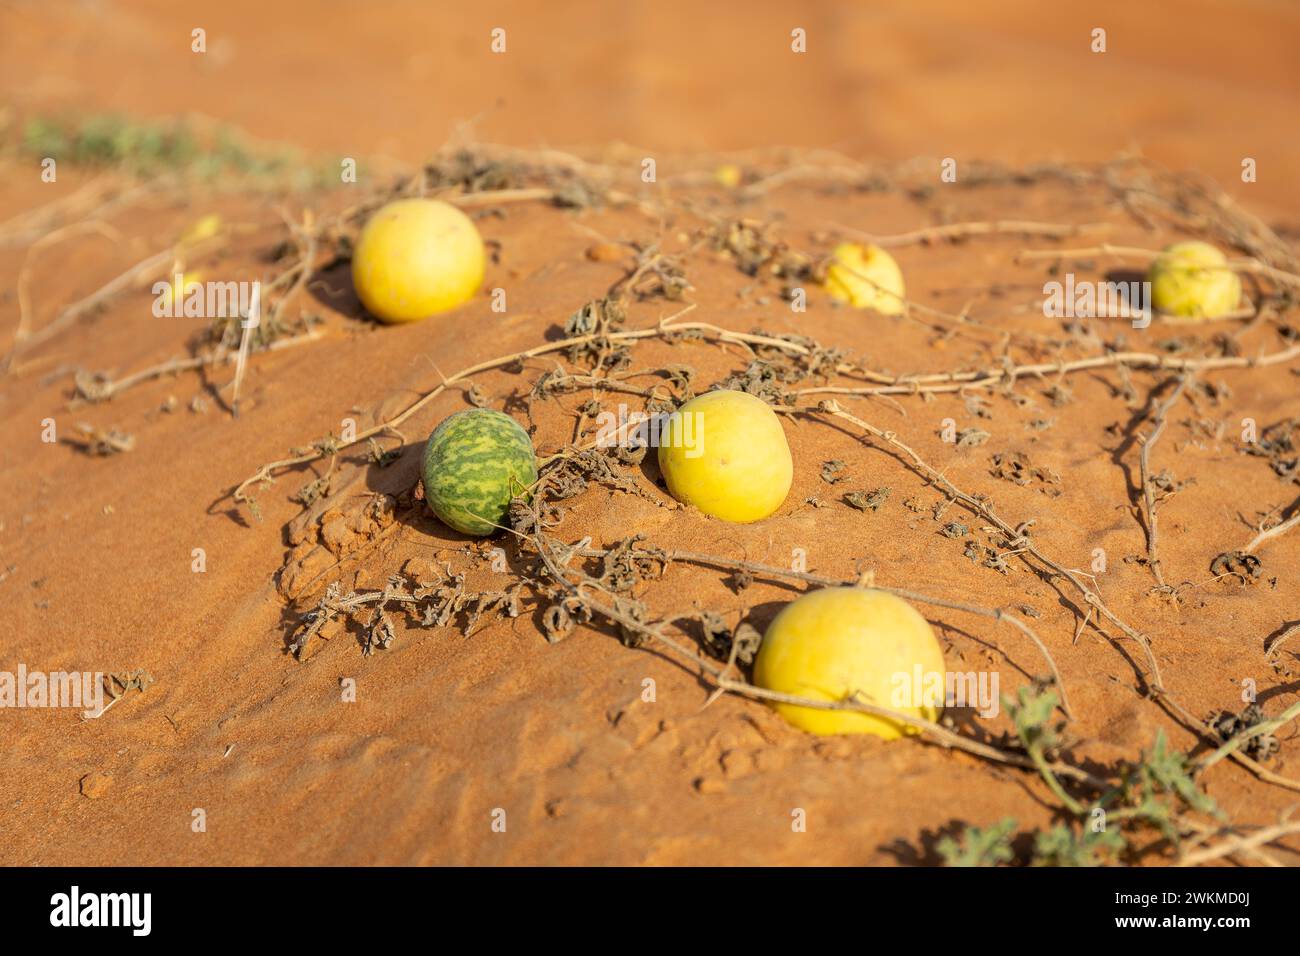 Citrullus colocynthis (colocynth, bitter melon) ripe green and yellow fruits with stems growing on a sand dune, in the desert of United Arab Emirates. Stock Photo